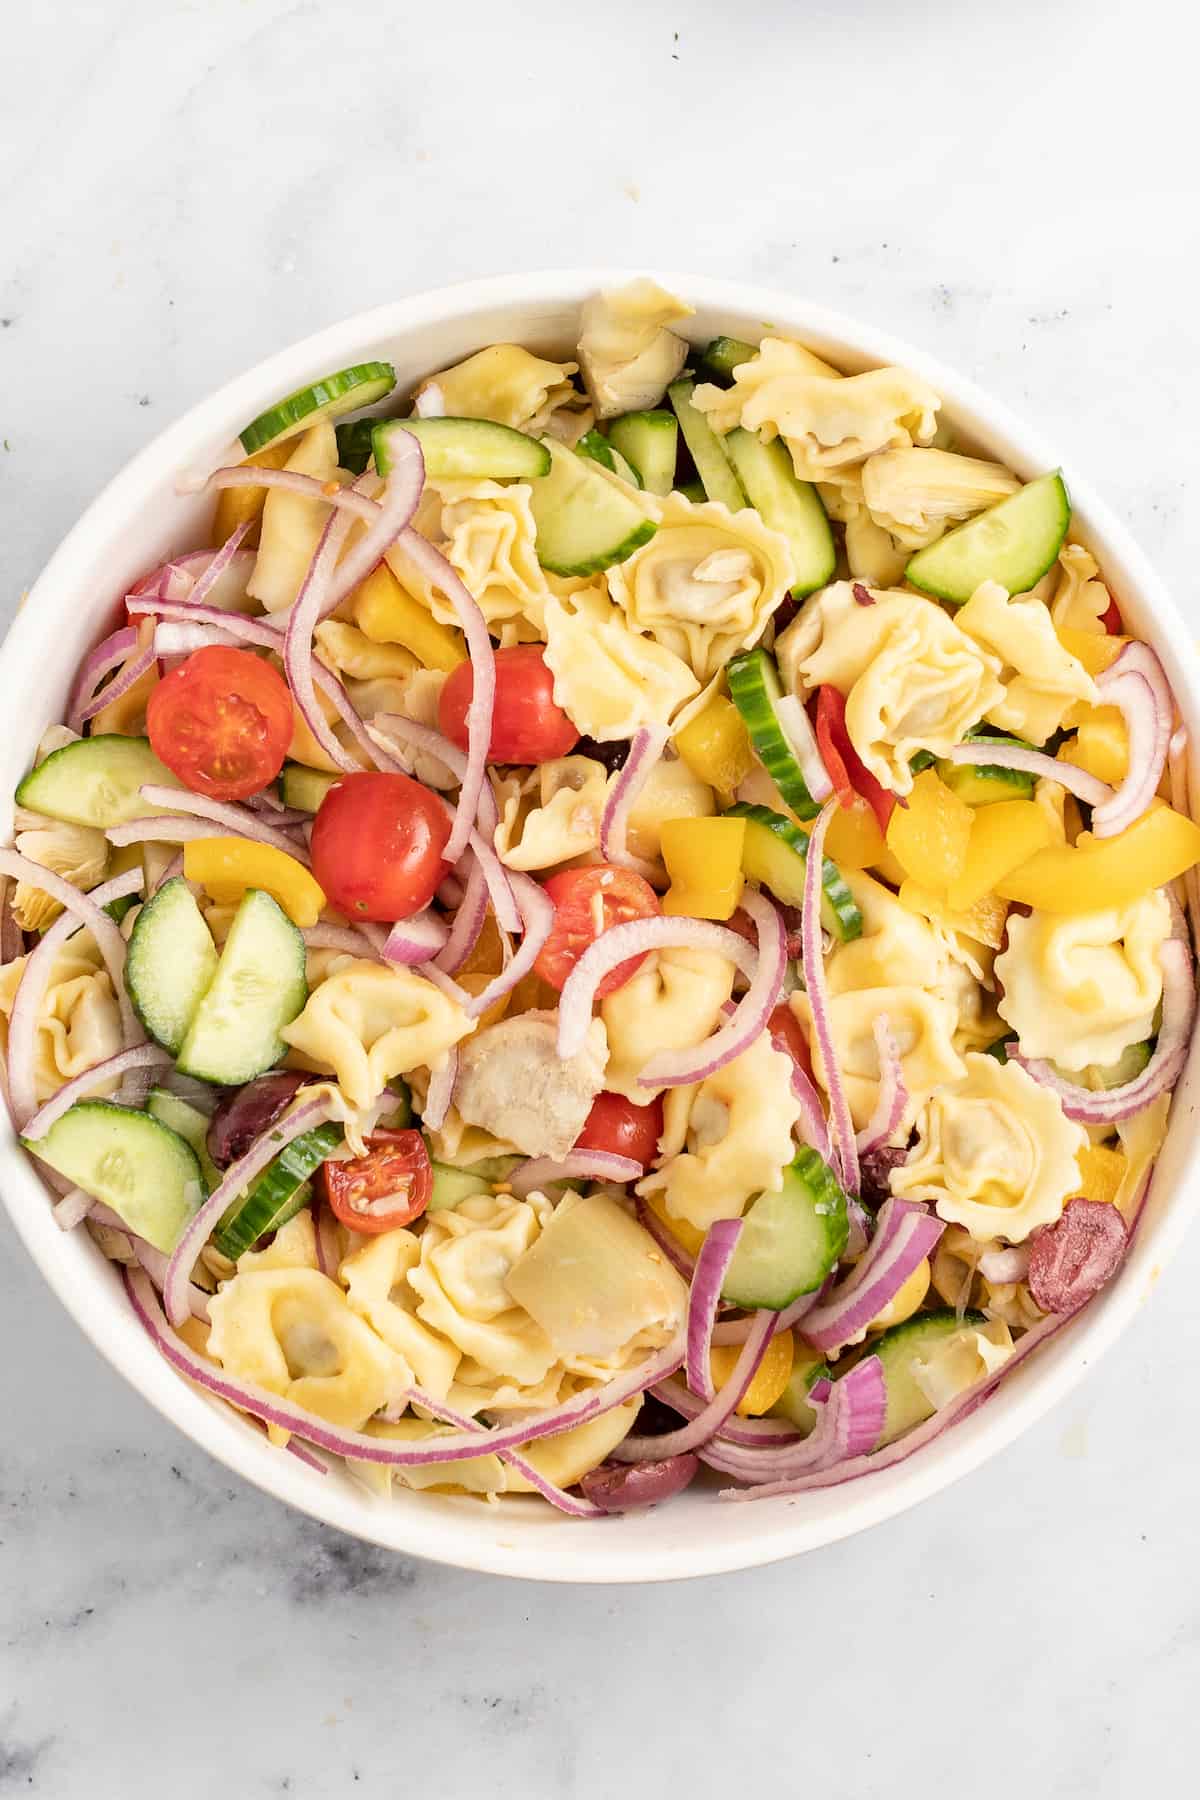 Bowl of chilled pasta salad.